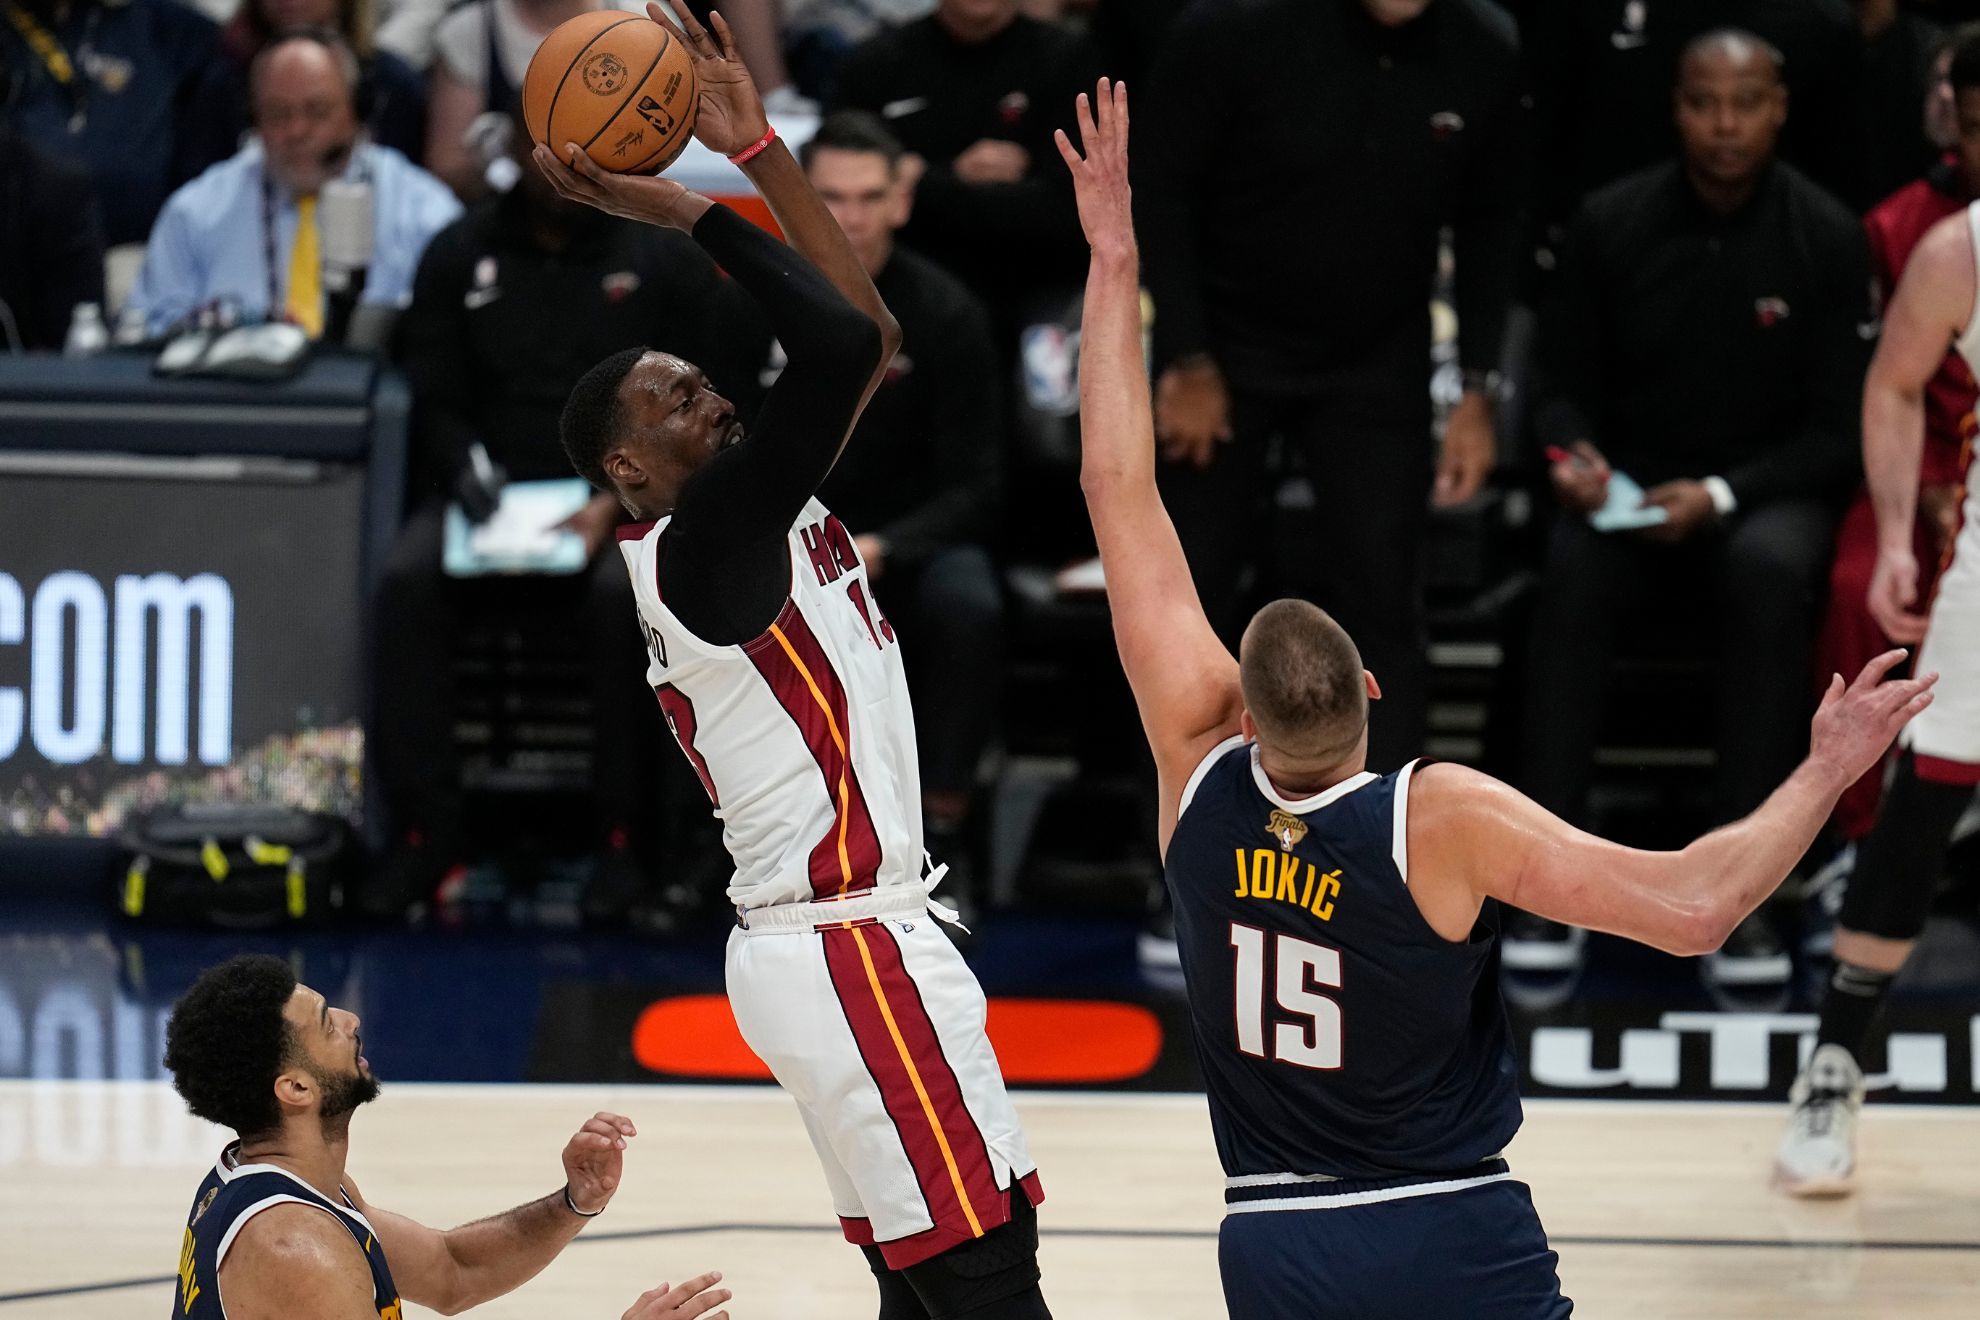 Miami Heat at Denver Nuggets, Game 2